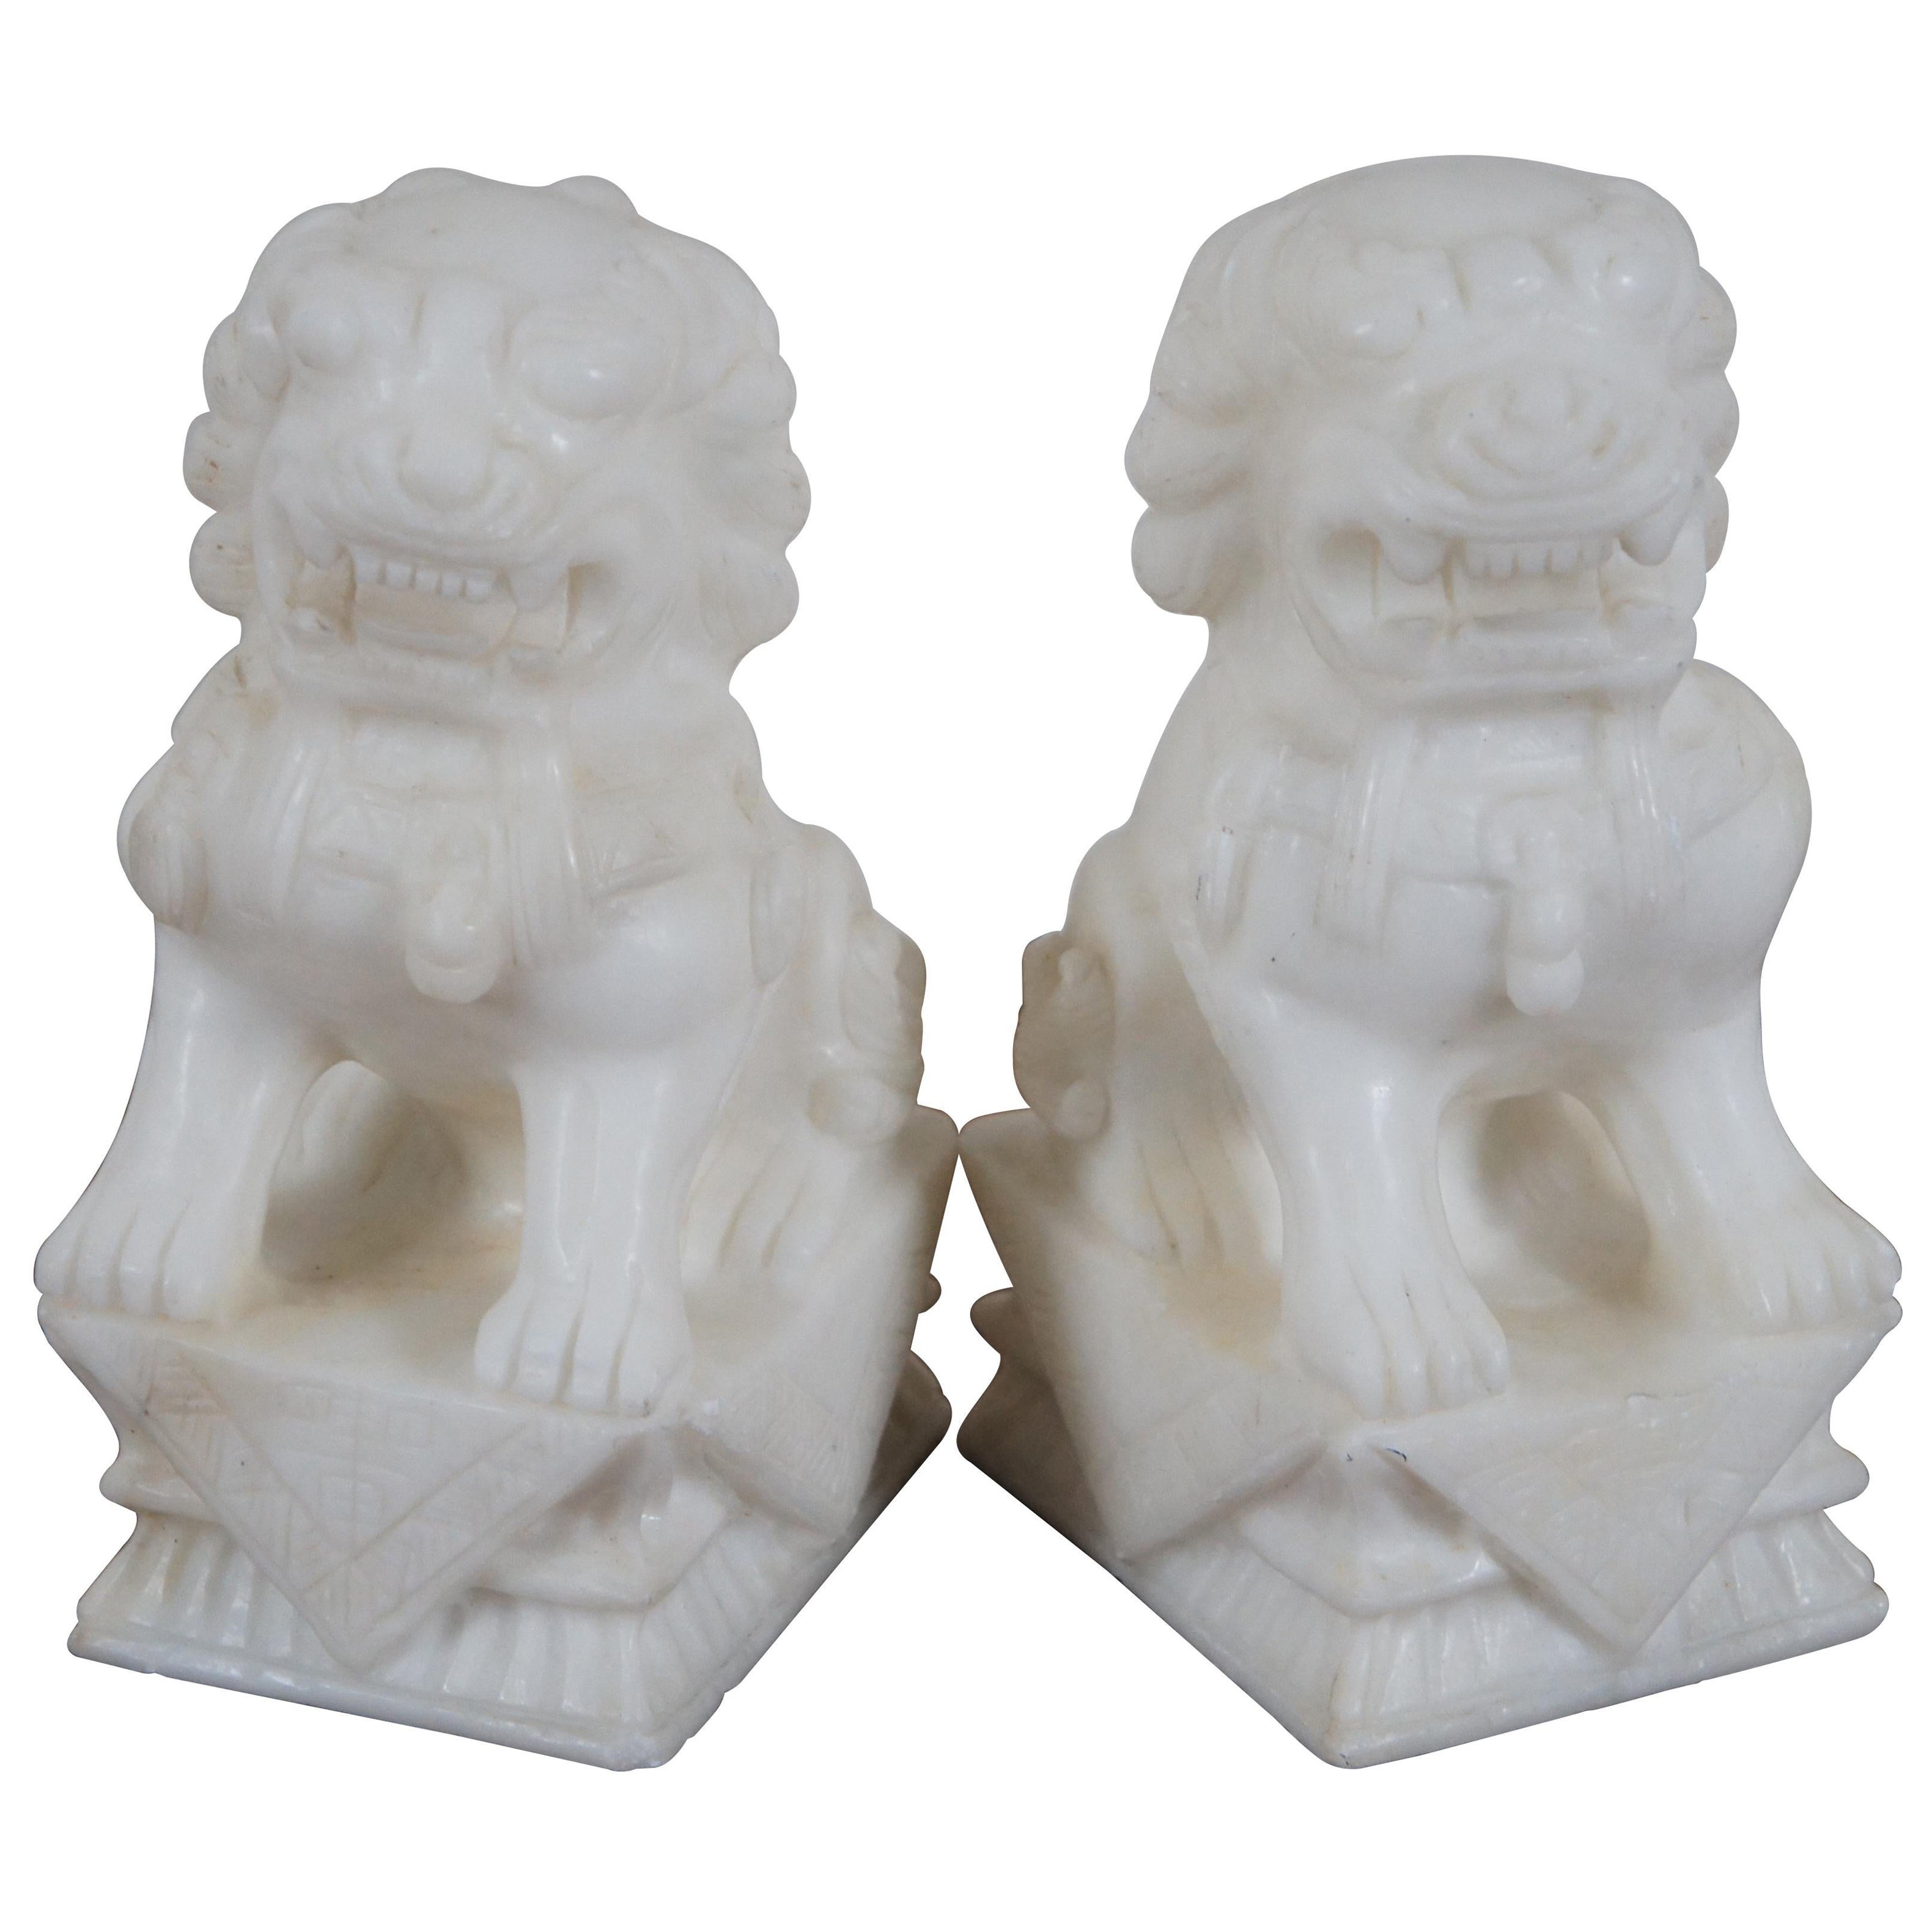 2 Carved White Marble Fu Foo Dogs Guardian Temple Lion Statue Bookends 7" For Sale